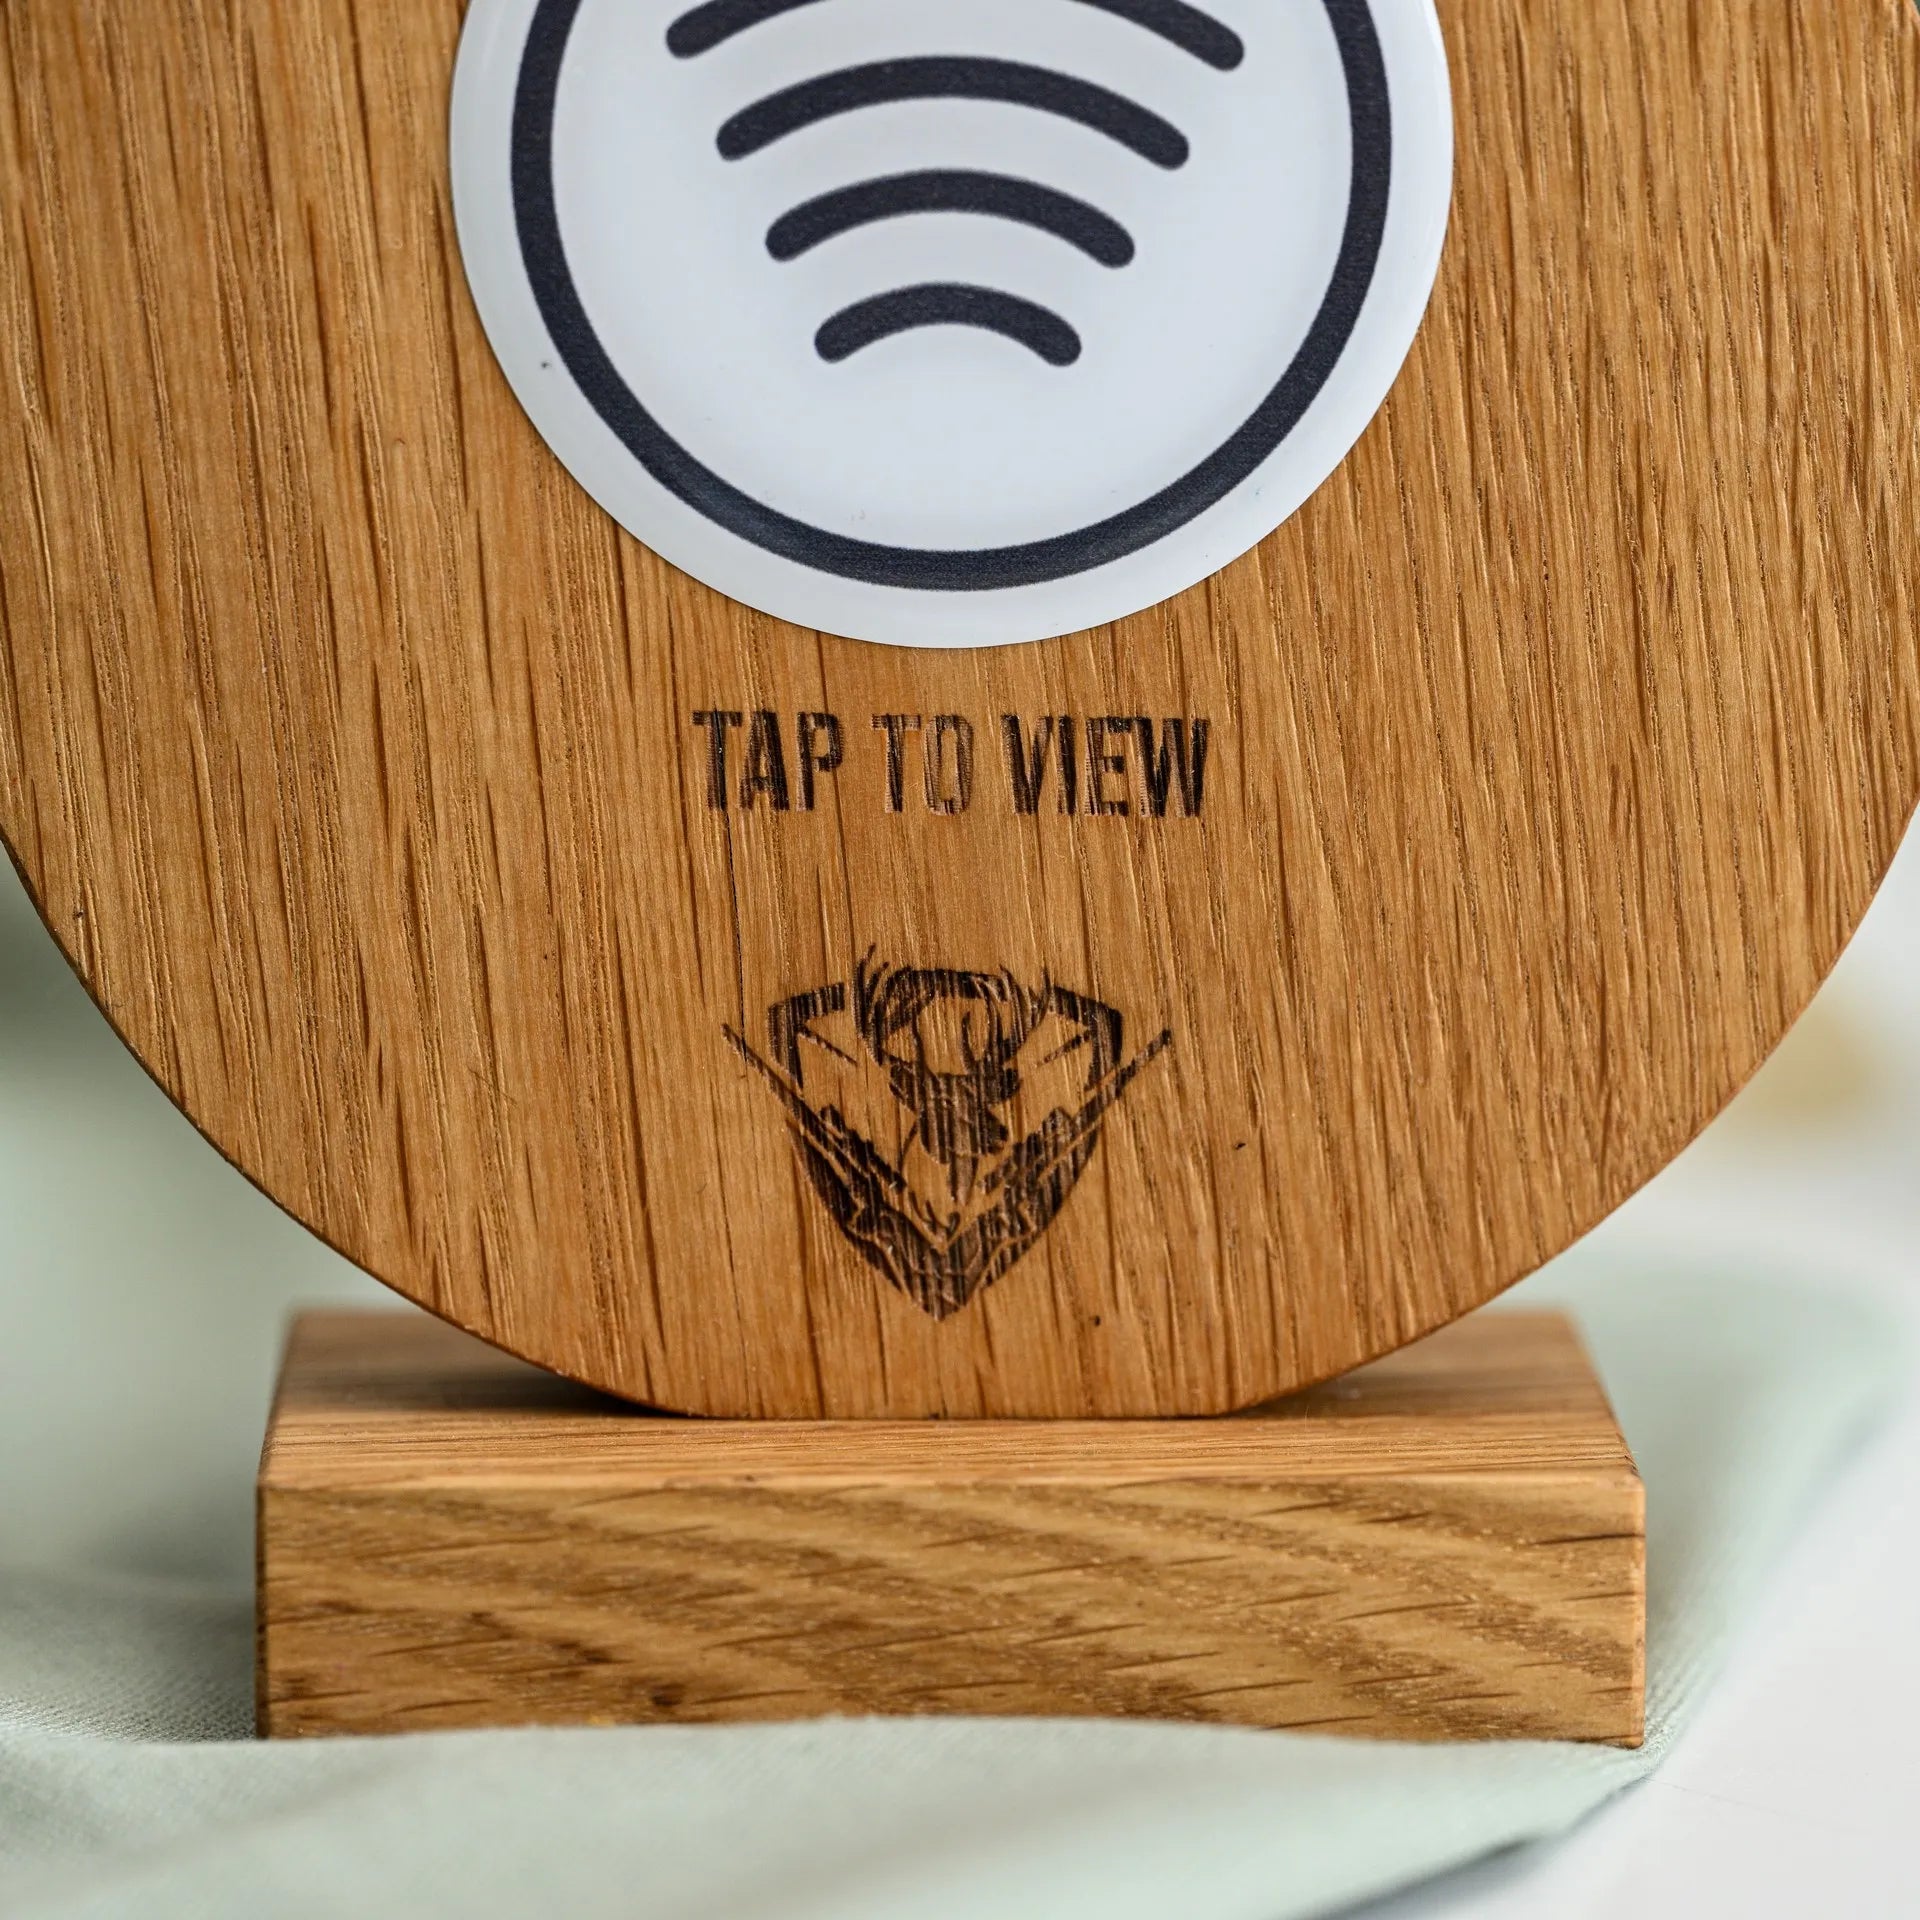 Customized NFC tag sign enhancing the dining ambiance.